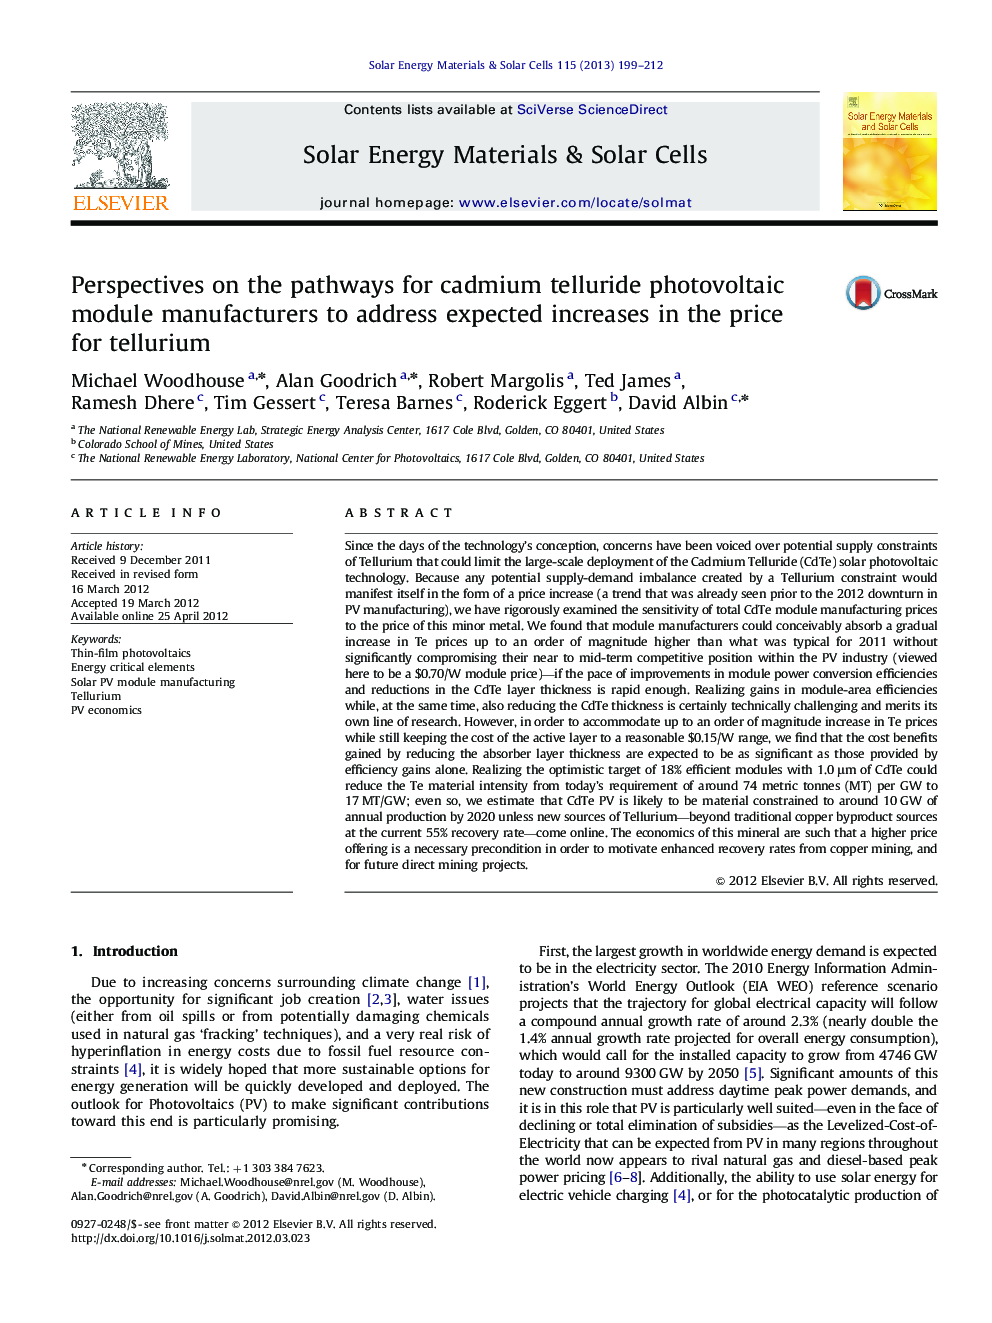 Perspectives on the pathways for cadmium telluride photovoltaic module manufacturers to address expected increases in the price for tellurium